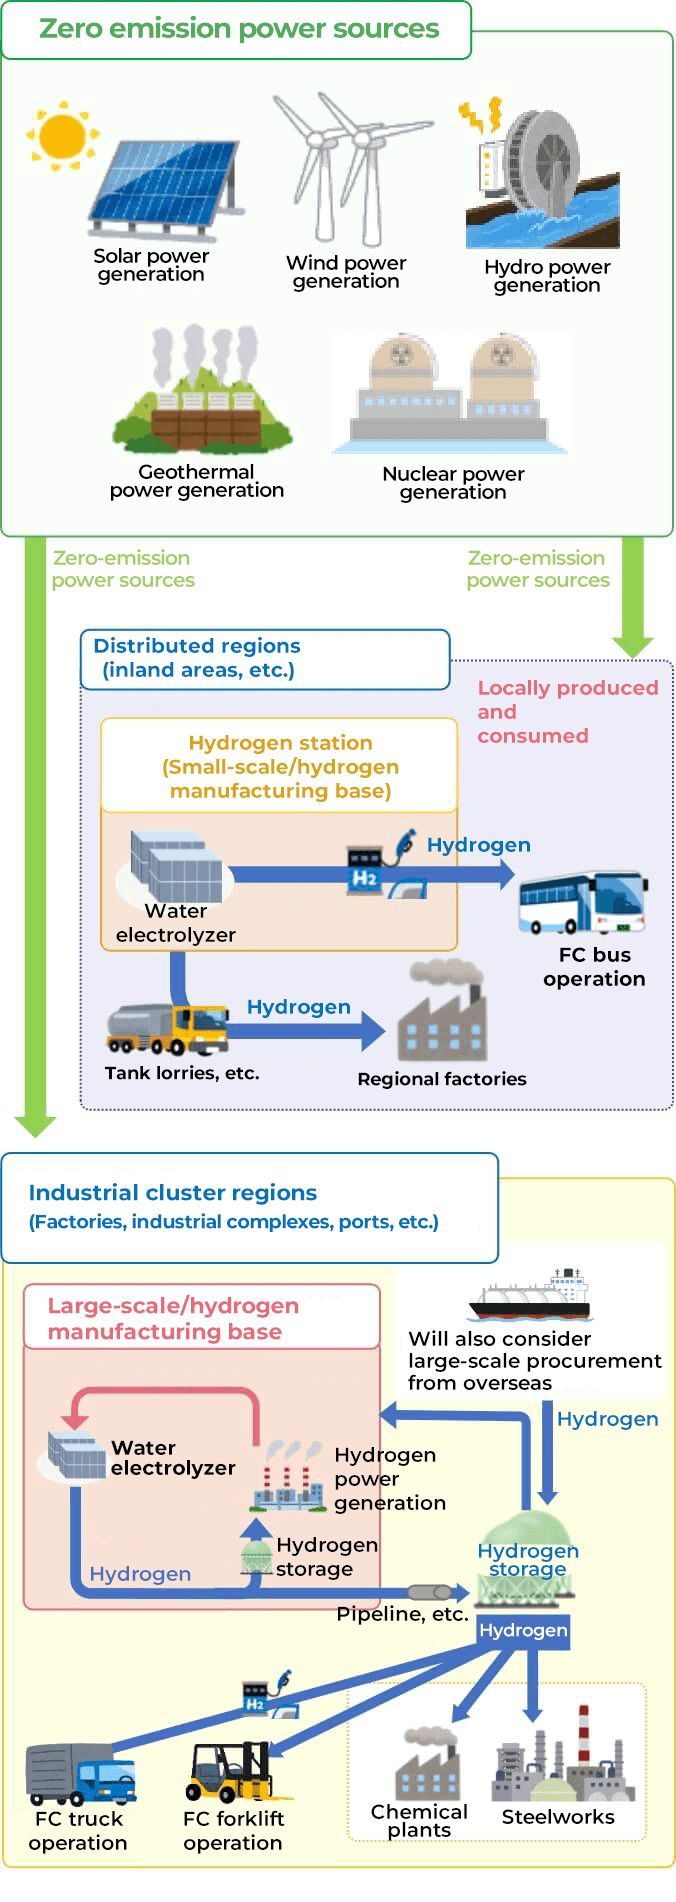 Considerations for social implementation of hydrogen